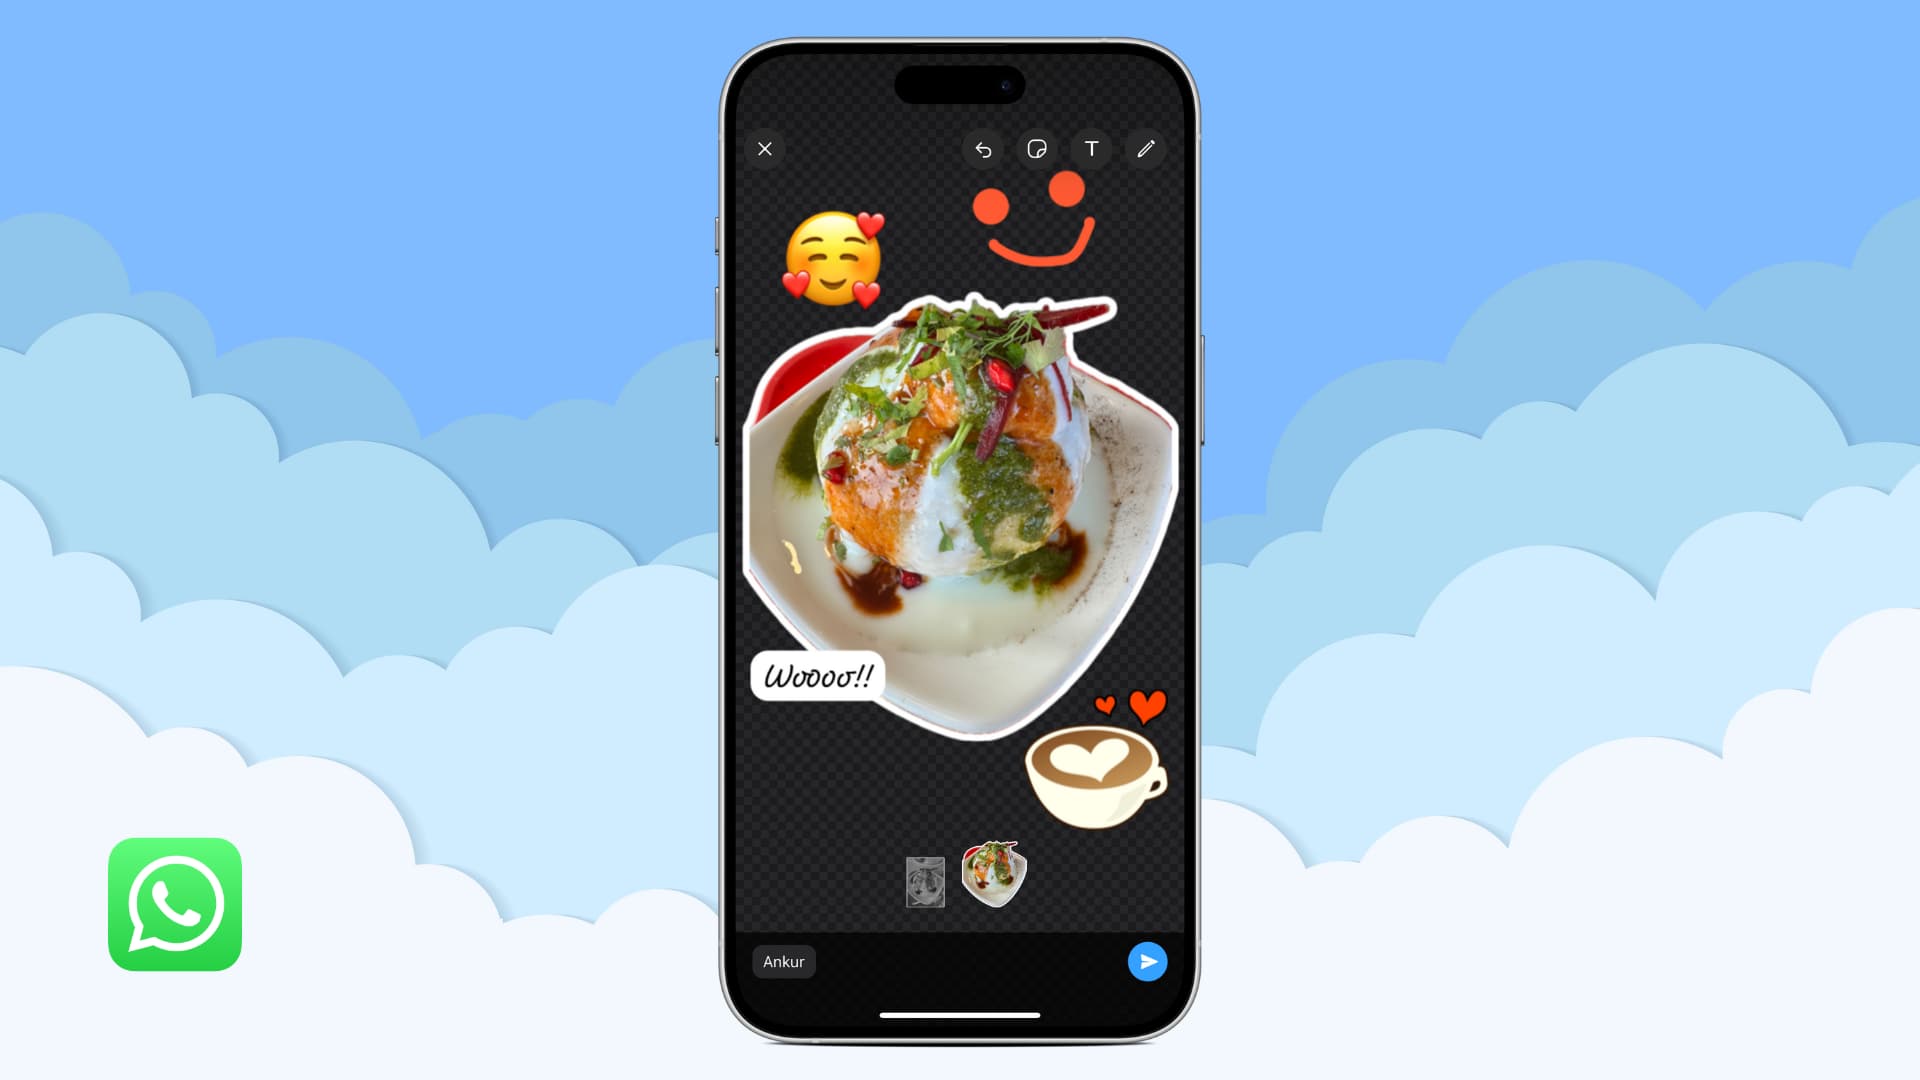 How to create your own stickers on WhatsApp